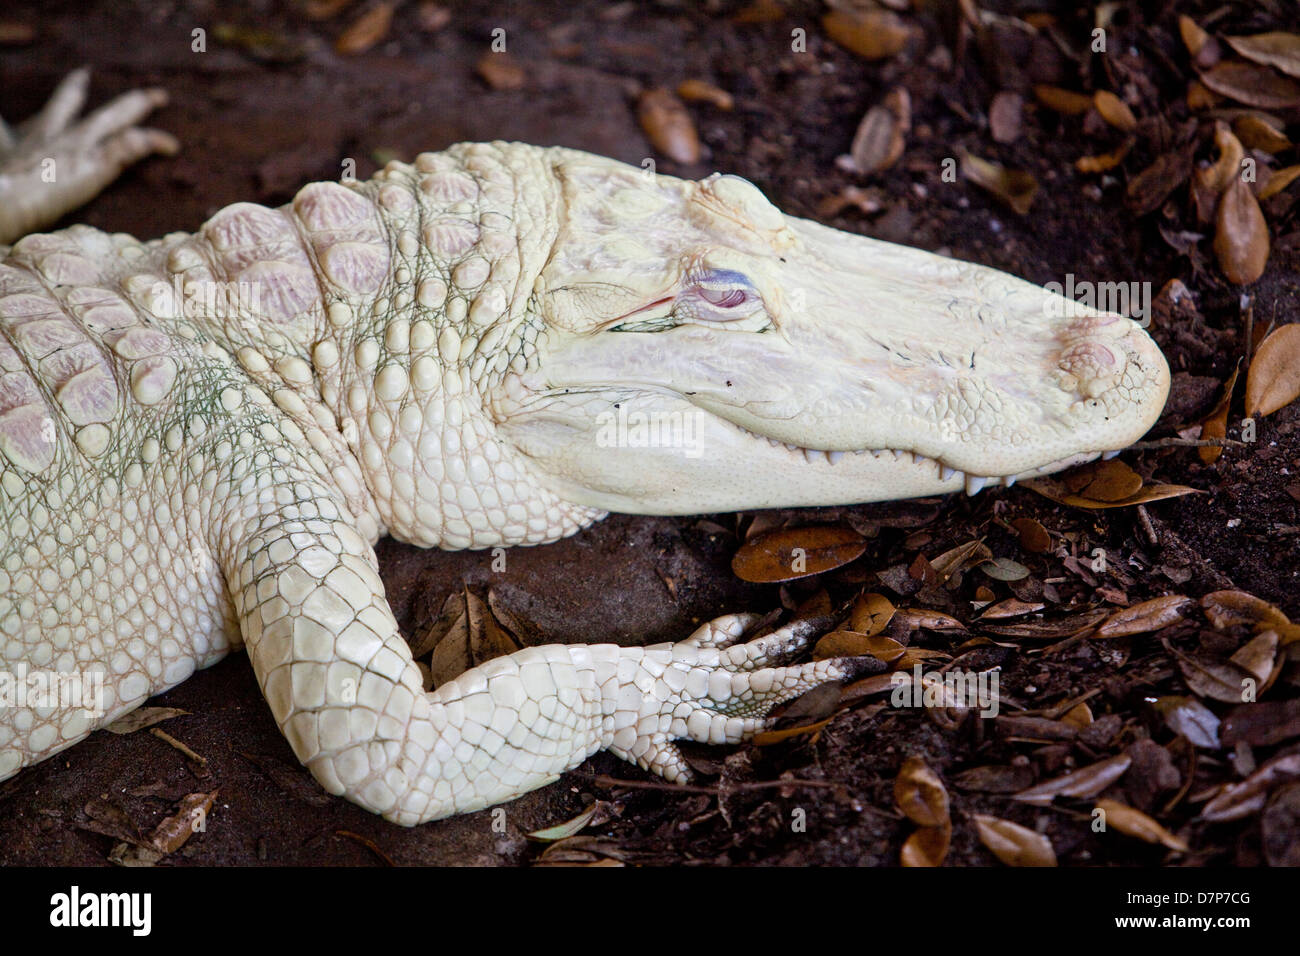 An albino Alligator is seen at Alligator farm Zoological Park in St. Augustine, Florida Stock Photo